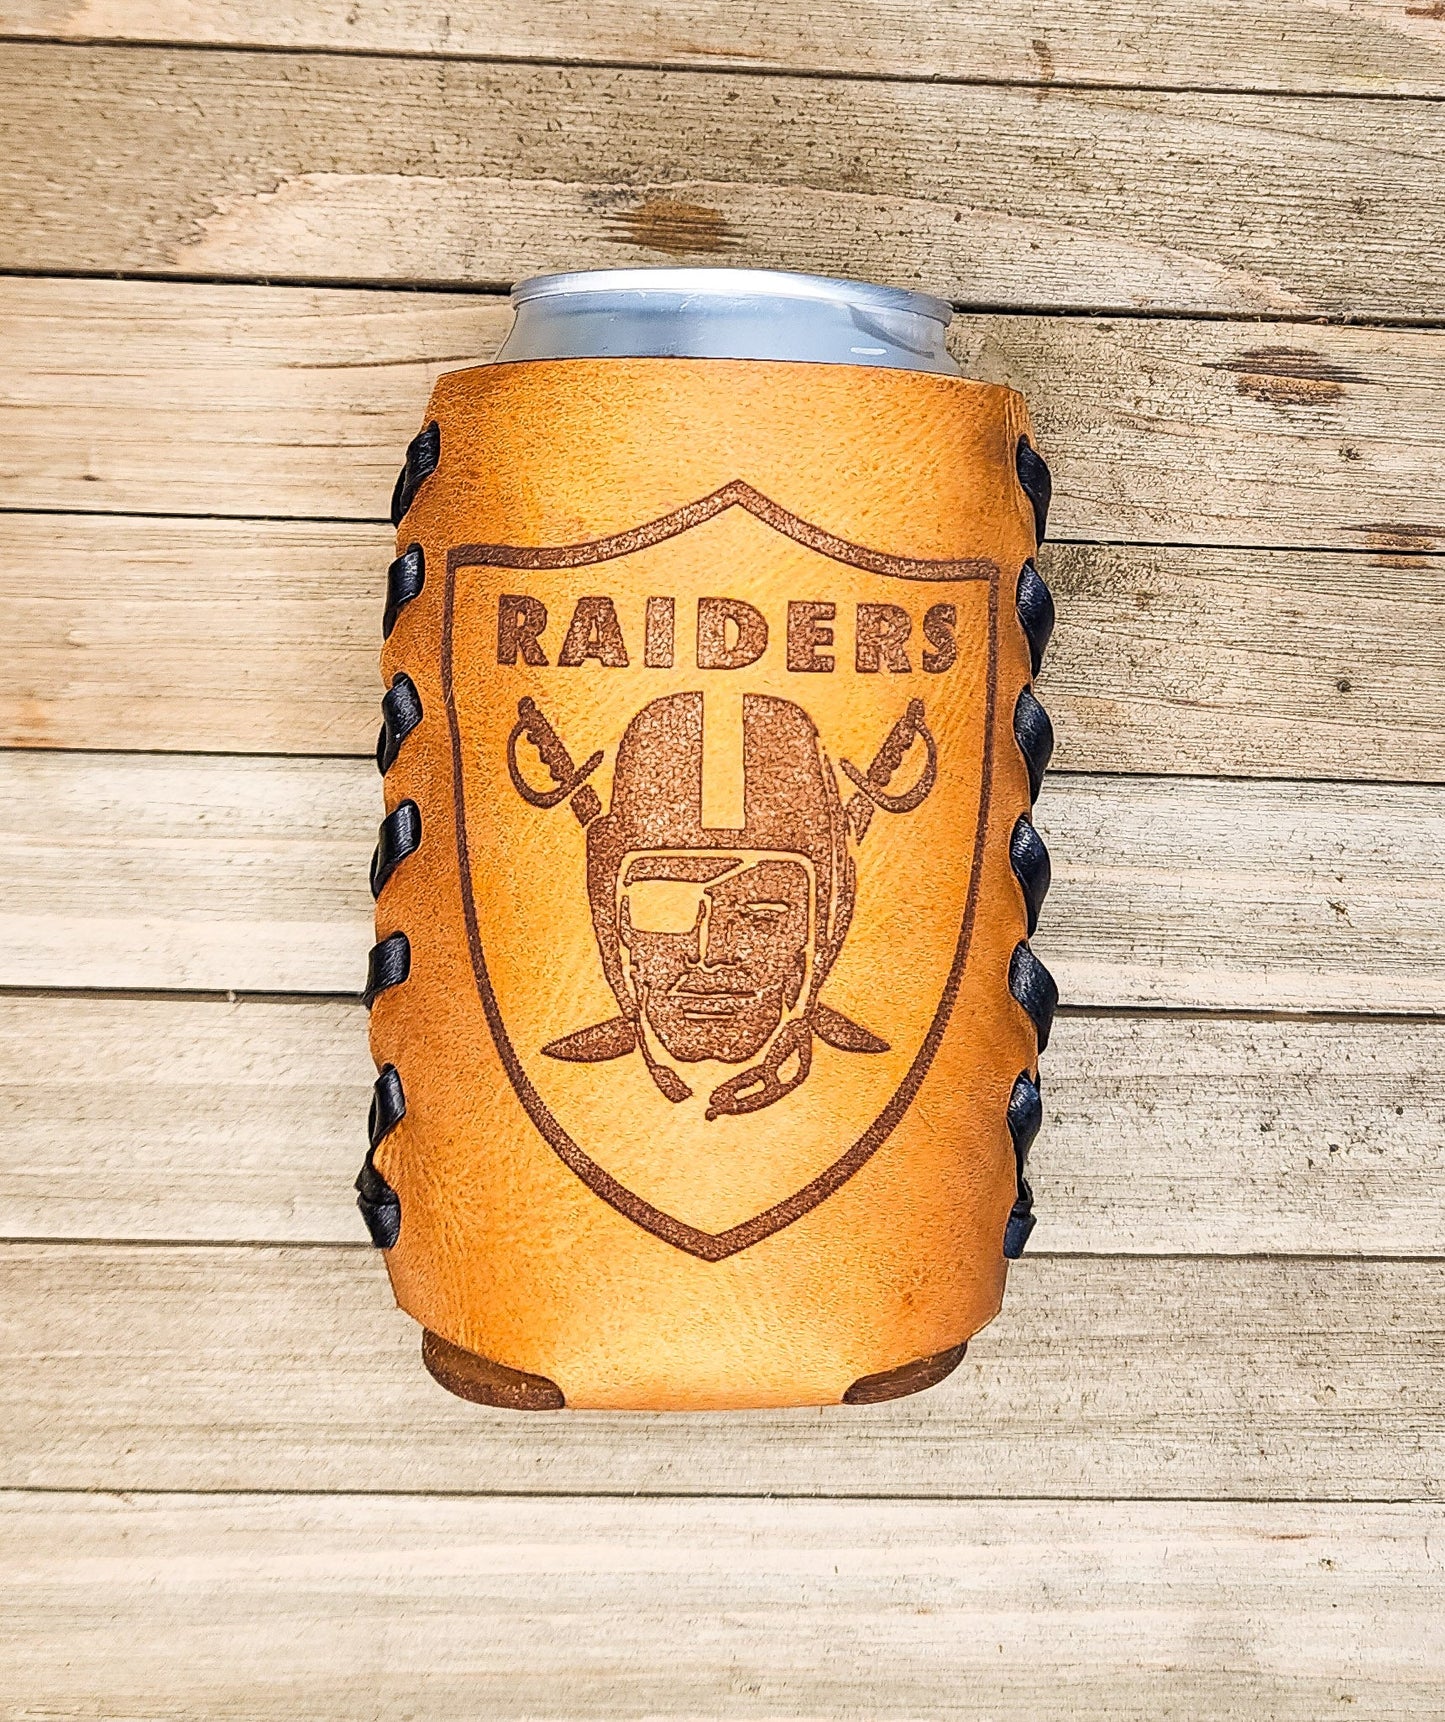 Las Vegas raiders premium leather koozie in tan perfect gift for football fans